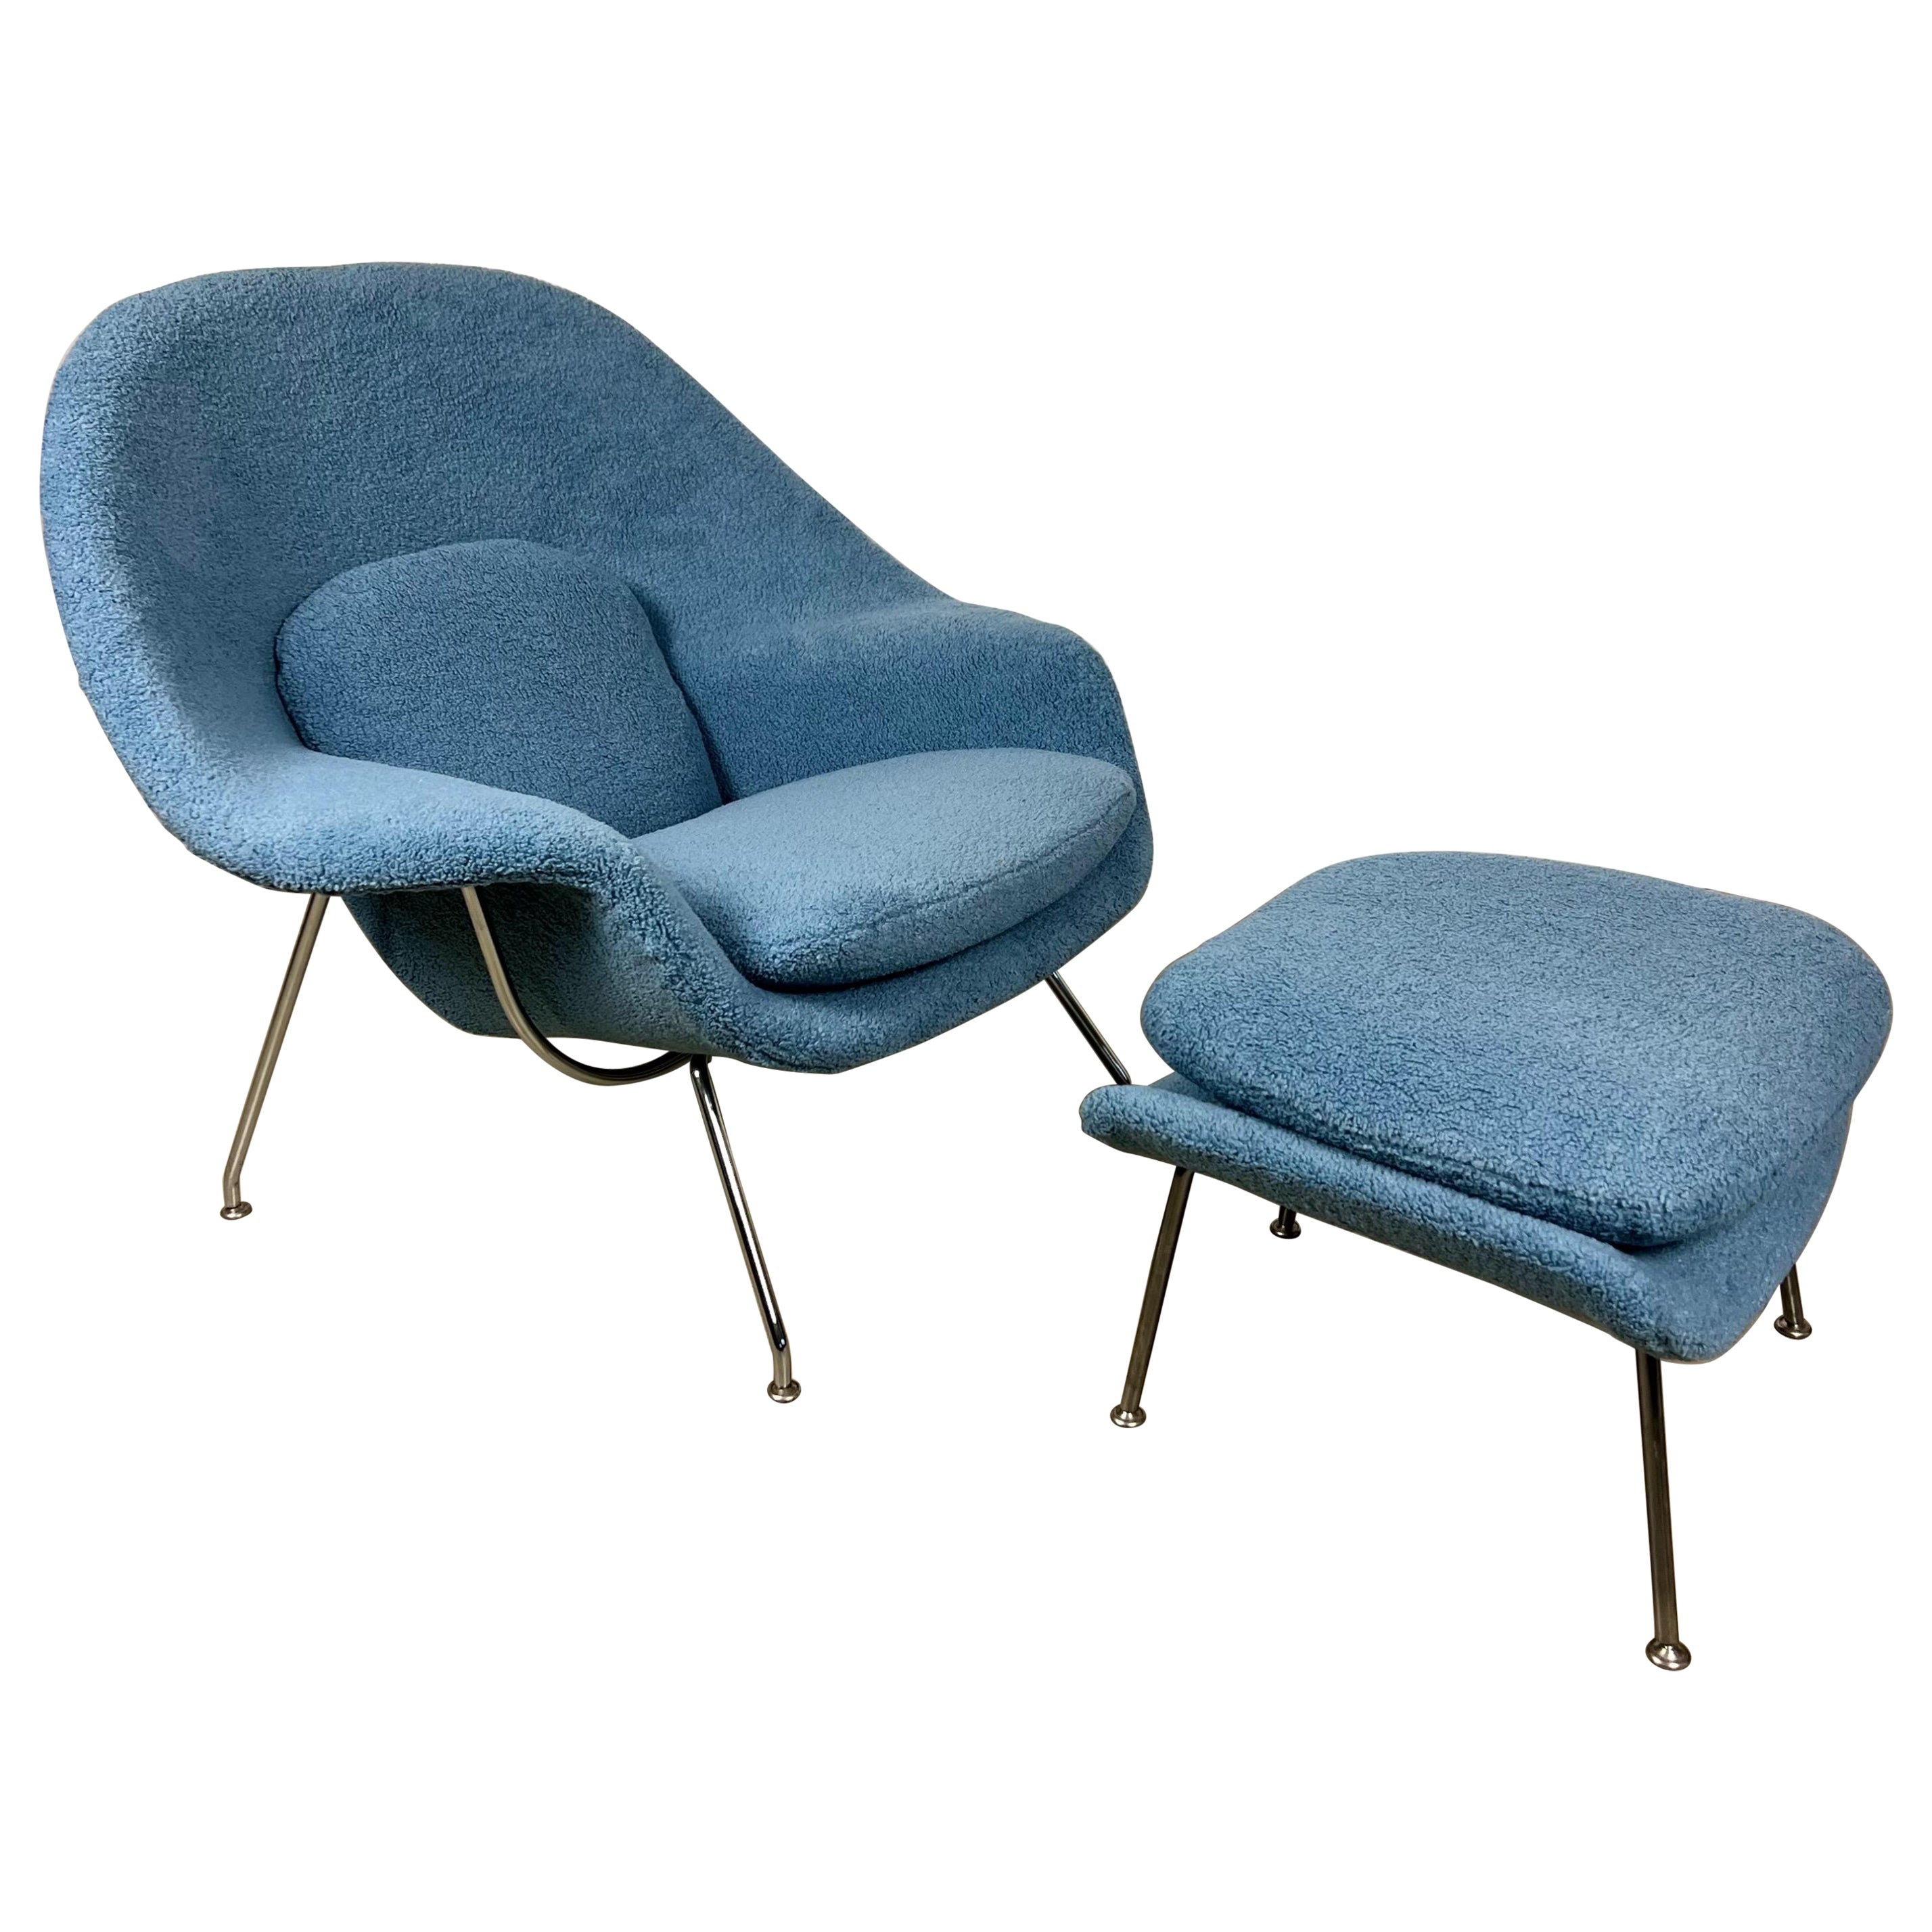 Eero Saarinen for Knoll womb chair and ottoman in Nick Cave Shearling